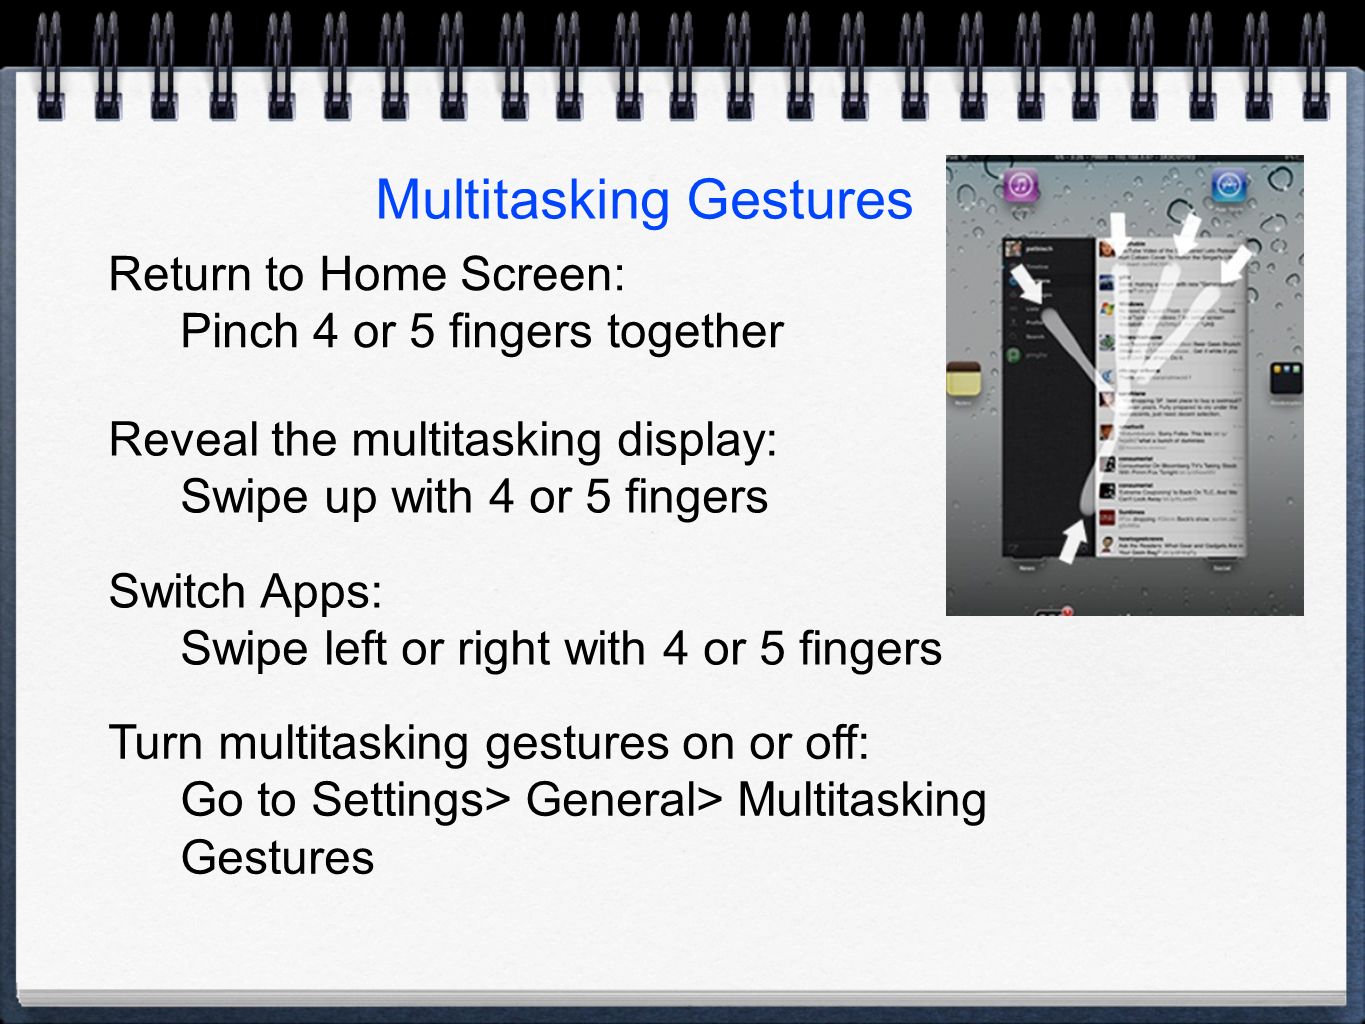 Multitasking Gestures Return to Home Screen: Pinch 4 or 5 fingers together Reveal the multitasking display: Swipe up with 4 or 5 fingers Switch Apps: Swipe left or right with 4 or 5 fingers Turn multitasking gestures on or off: Go to Settings> General> Multitasking Gestures